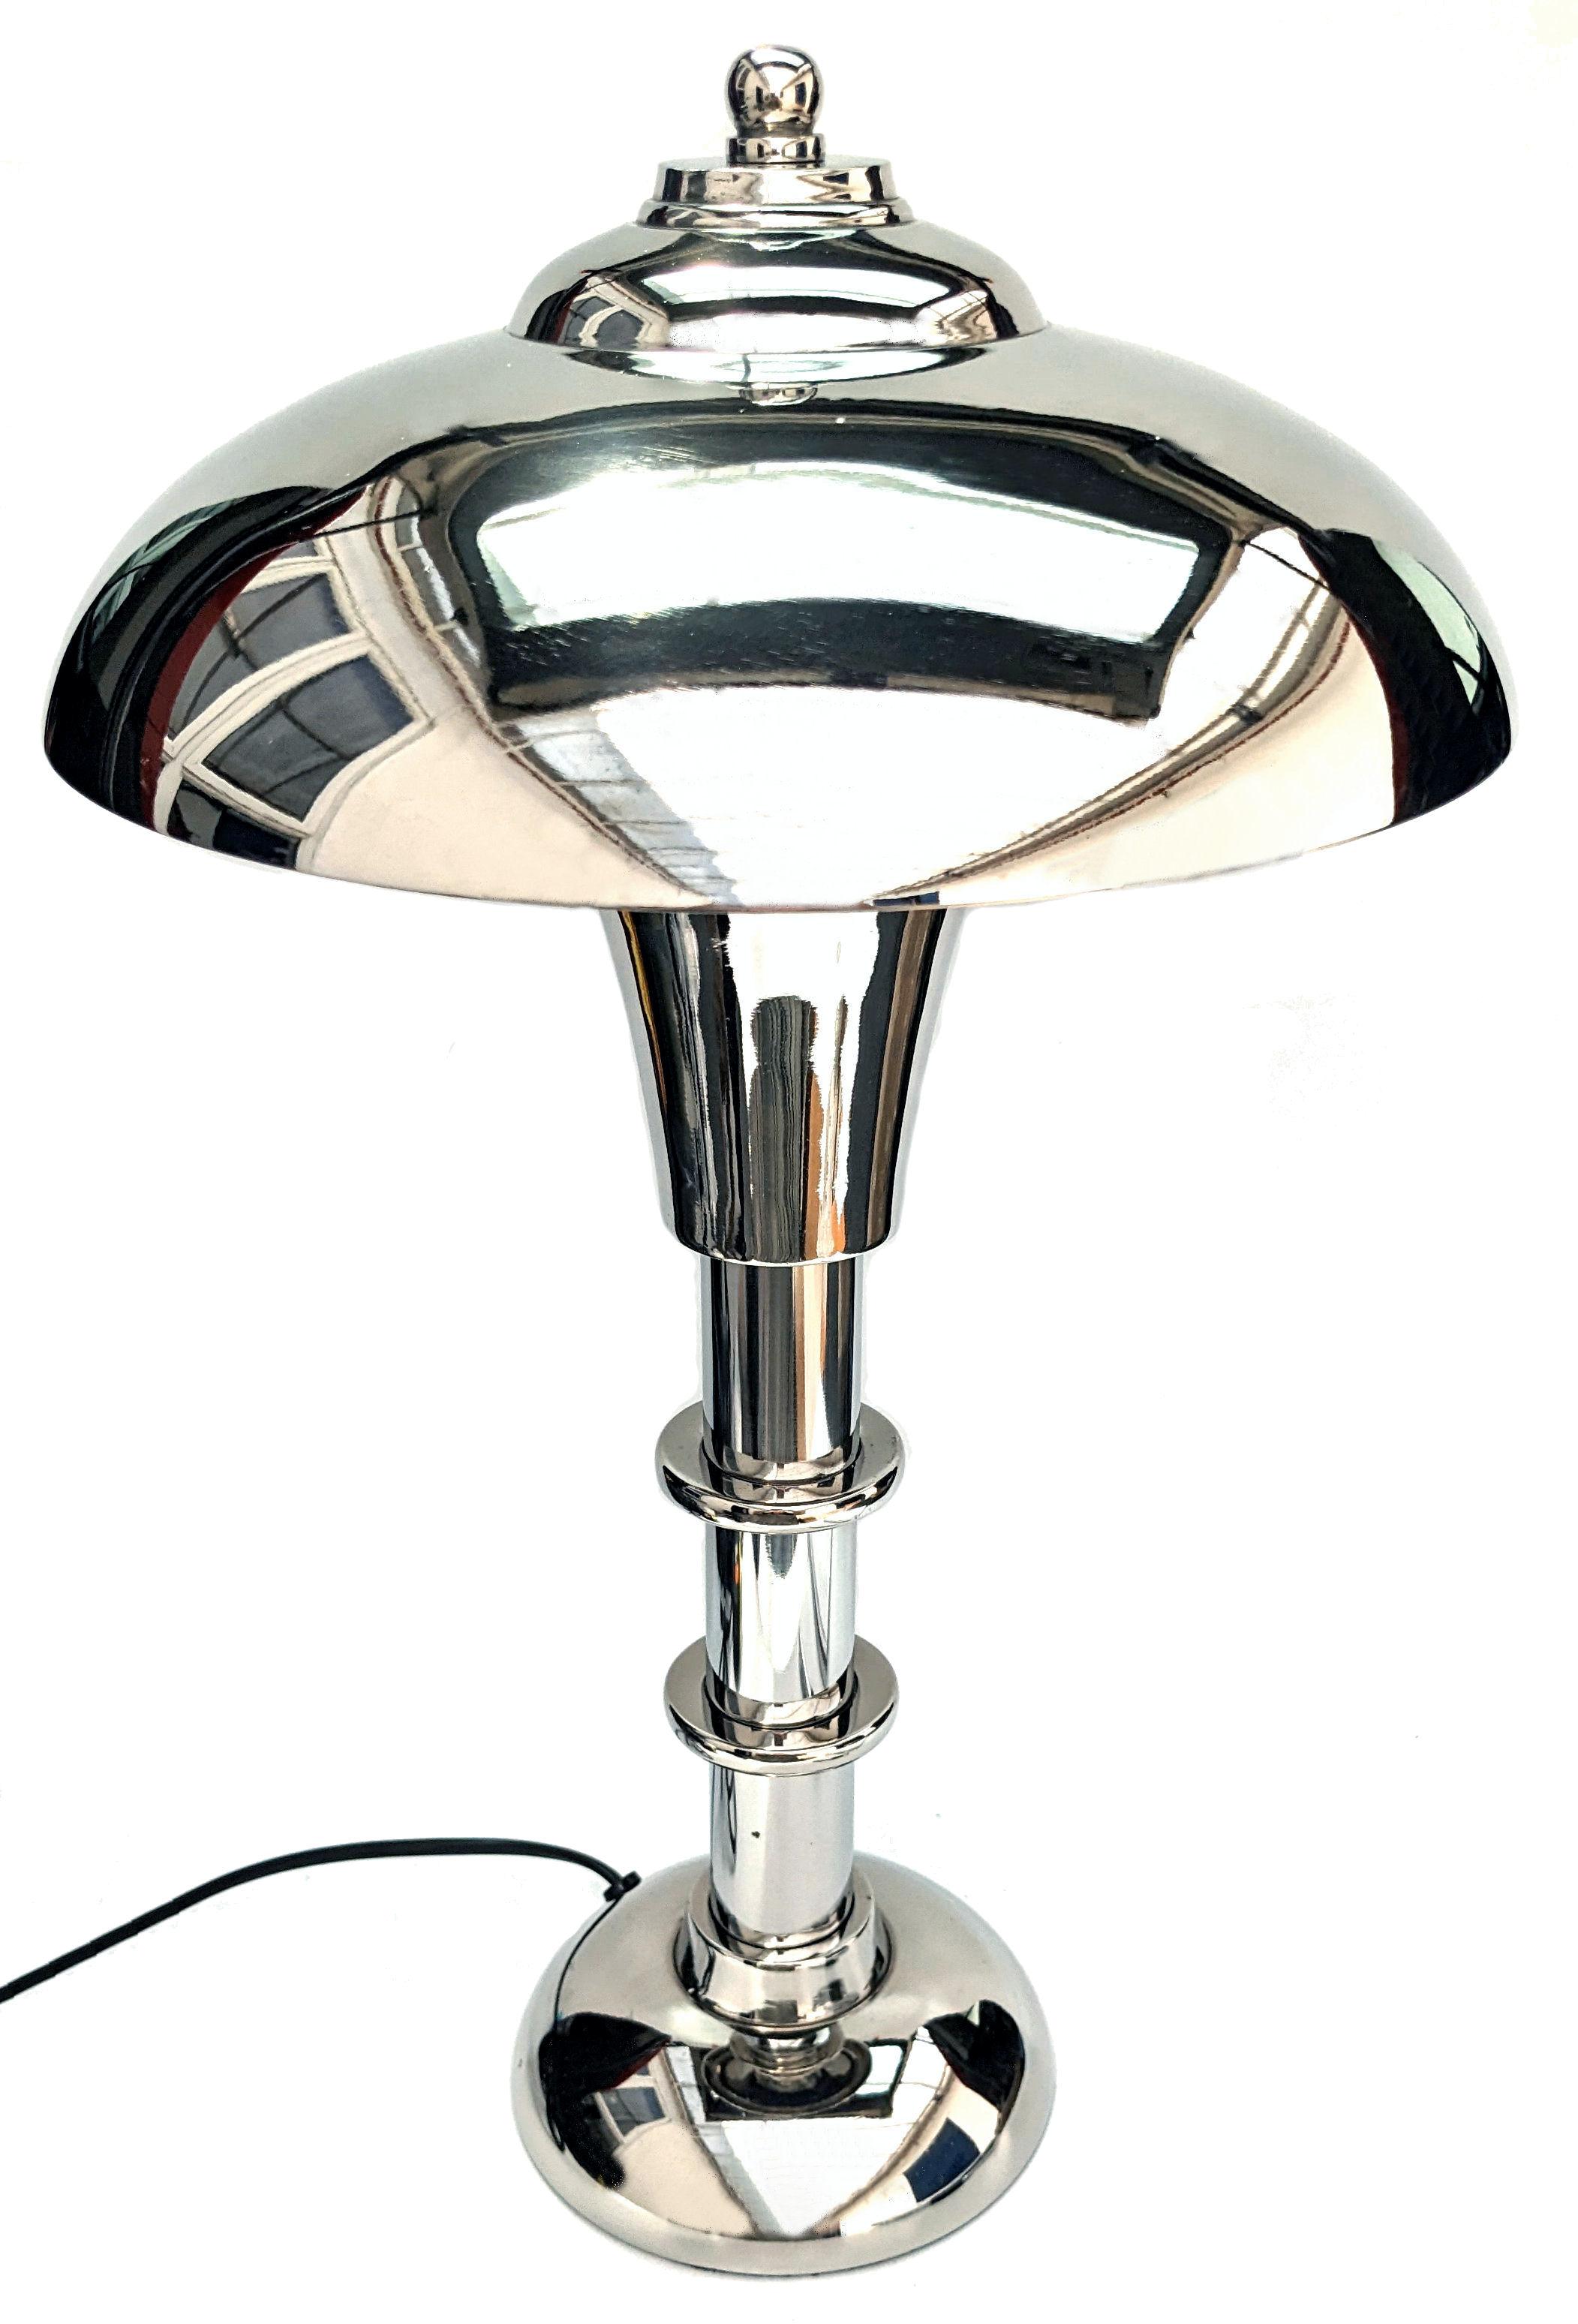 This is a perfect opportunity to acquire a pair of unique Machine Age style Art Deco table lamps, not mass produced these are handmade and hand polished to an extremely high standard in the UK of very small quantity, cast in solid aluminum, batches